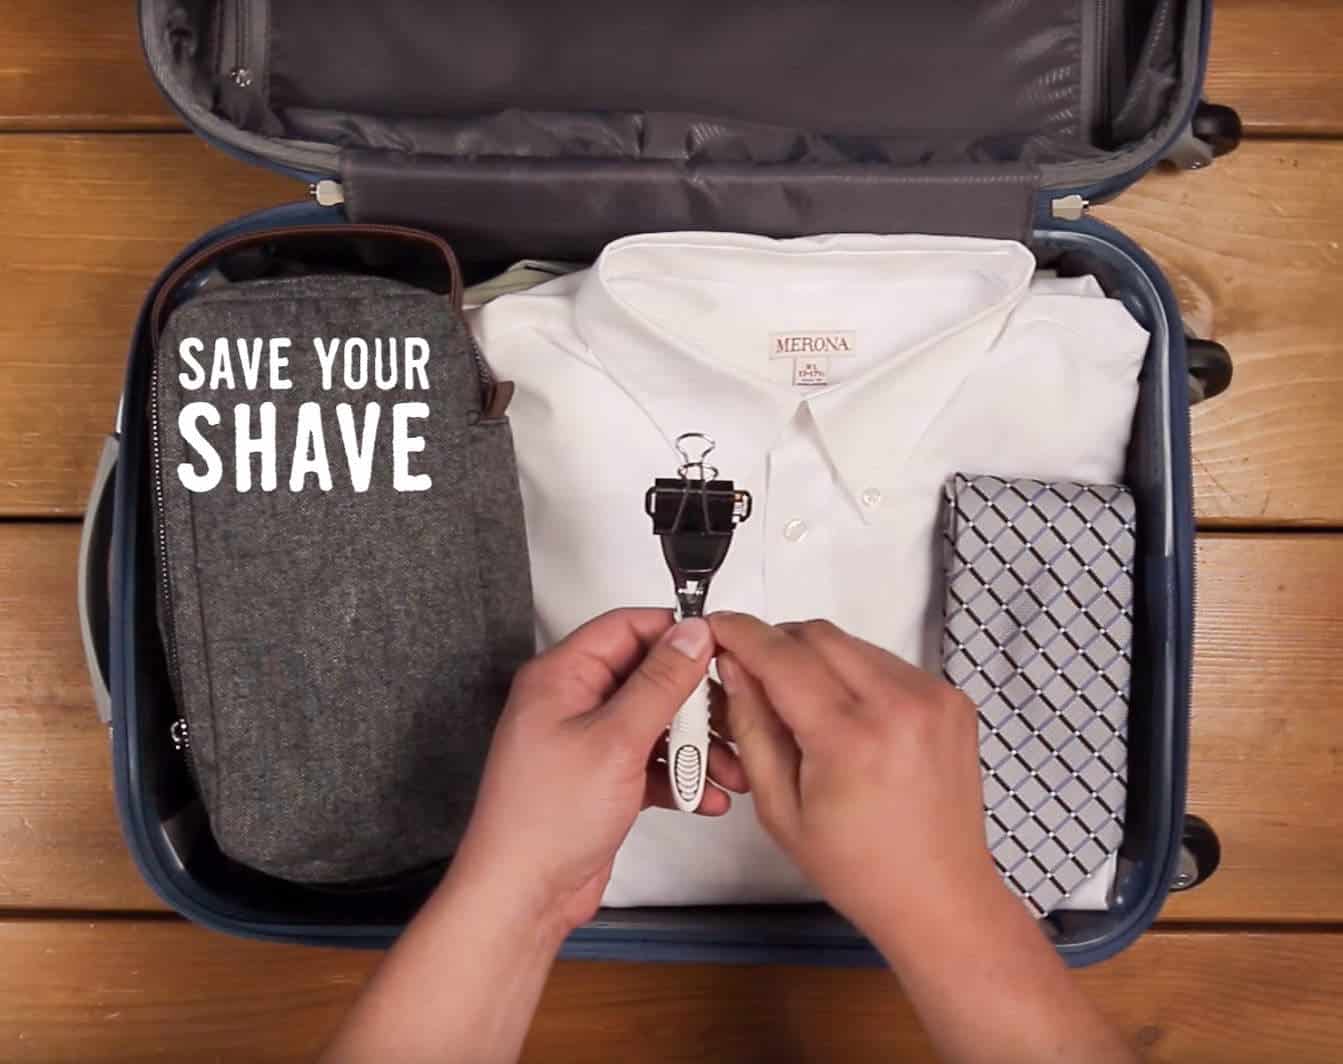 Protect your razor - These indispensable travel packing tips we’ve assembled will make your packing and unpacking much more efficient and help you stay super organized while on vacation. Now you’re set to travel like a pro!